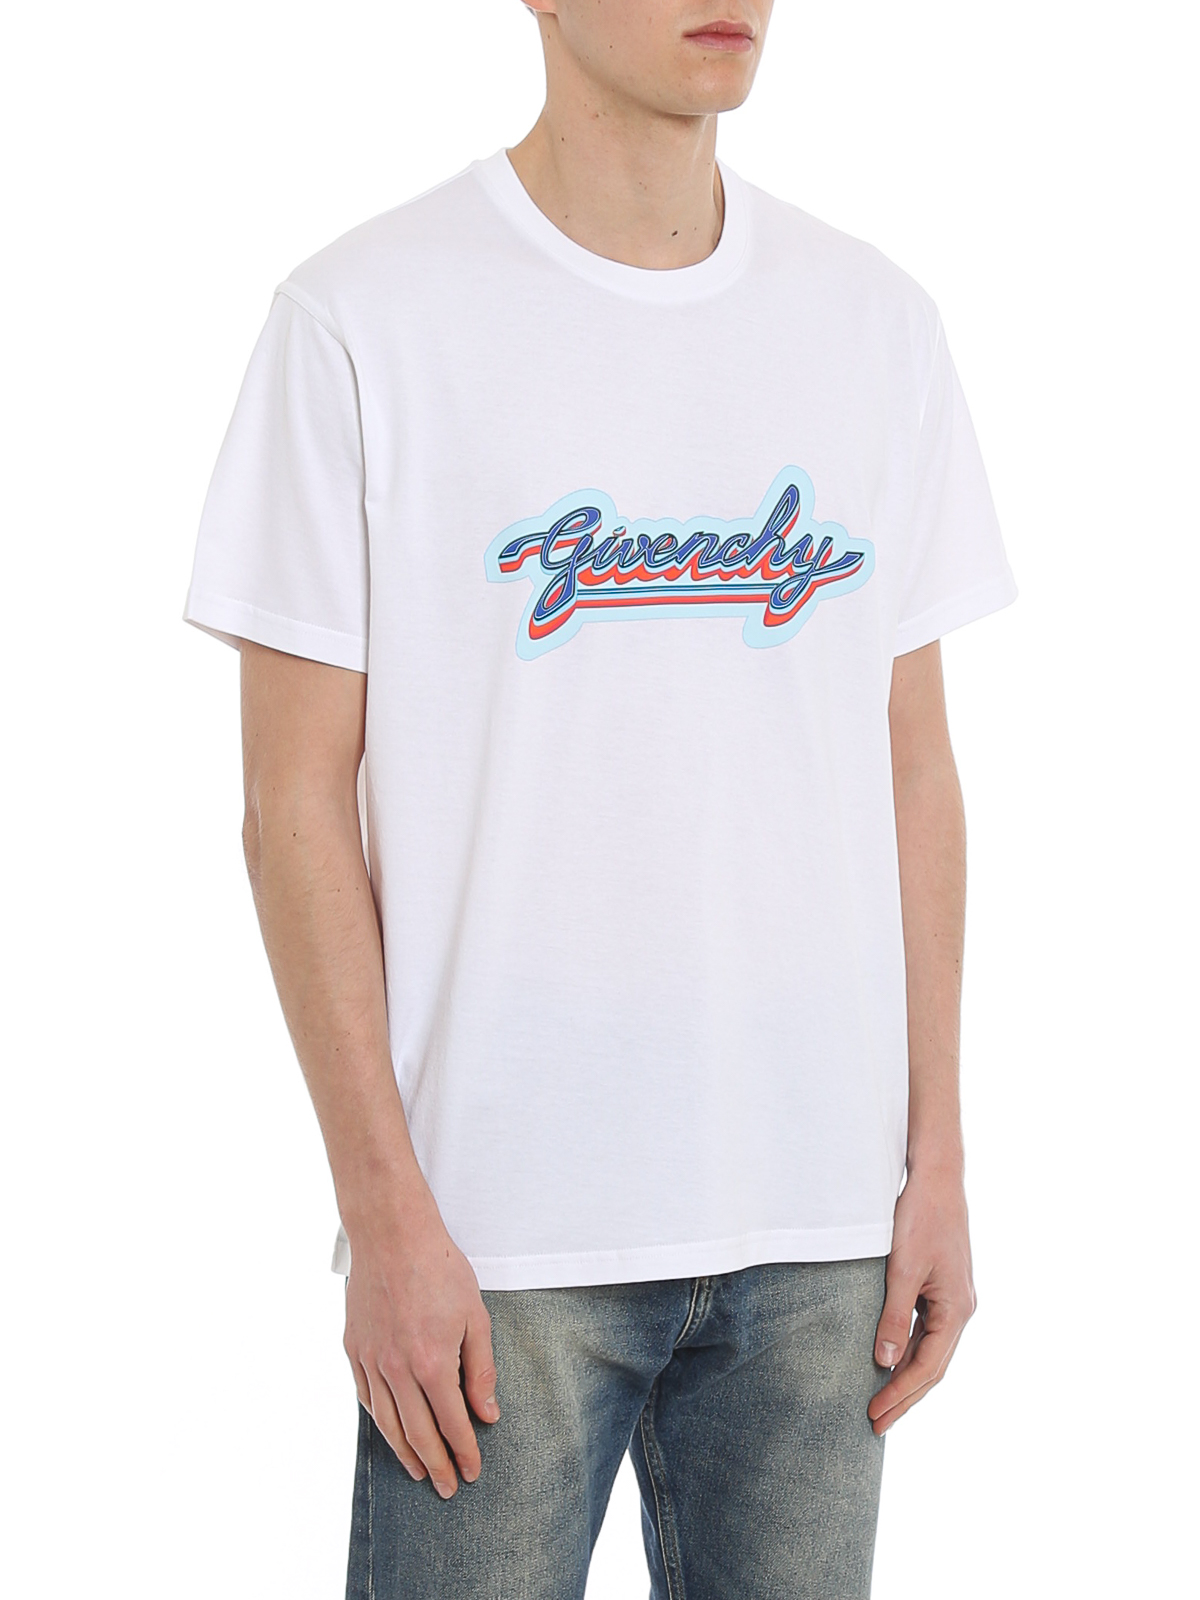 givenchy shirts online